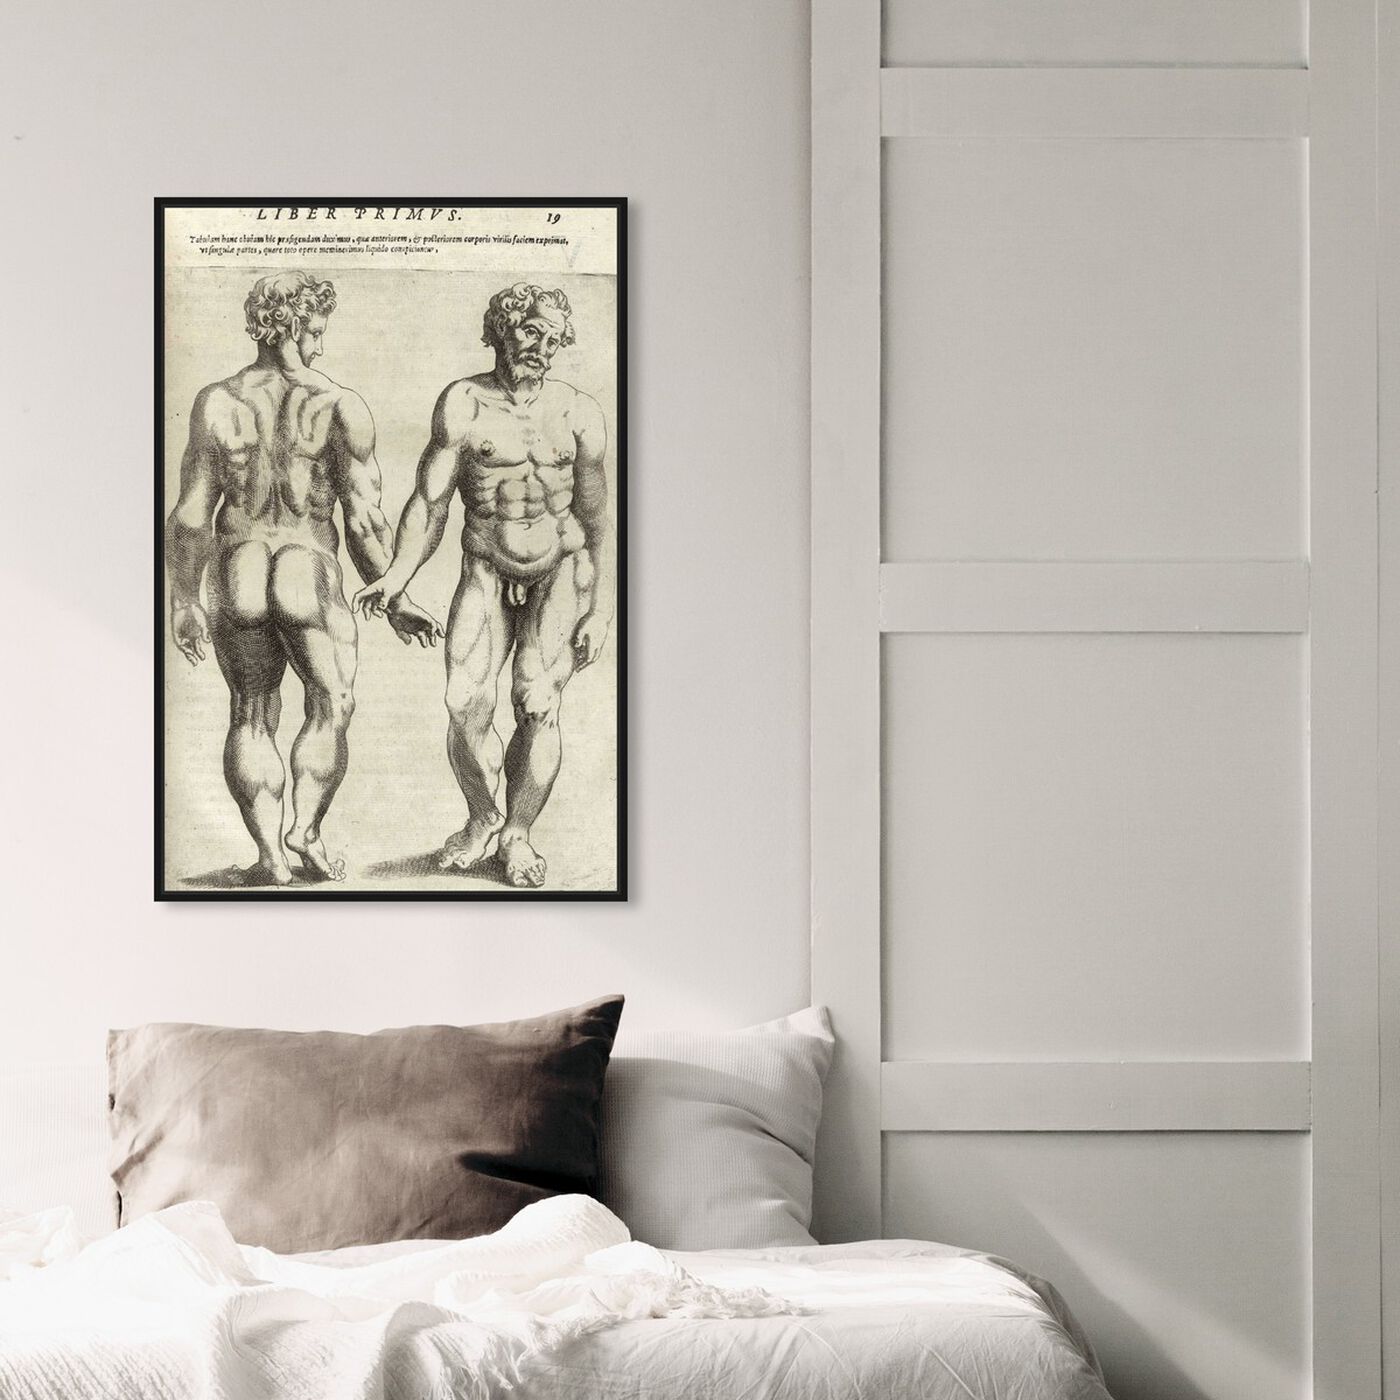 Hanging view of Liber Primvs II - The Art Cabinet featuring classic and figurative and nudes art.